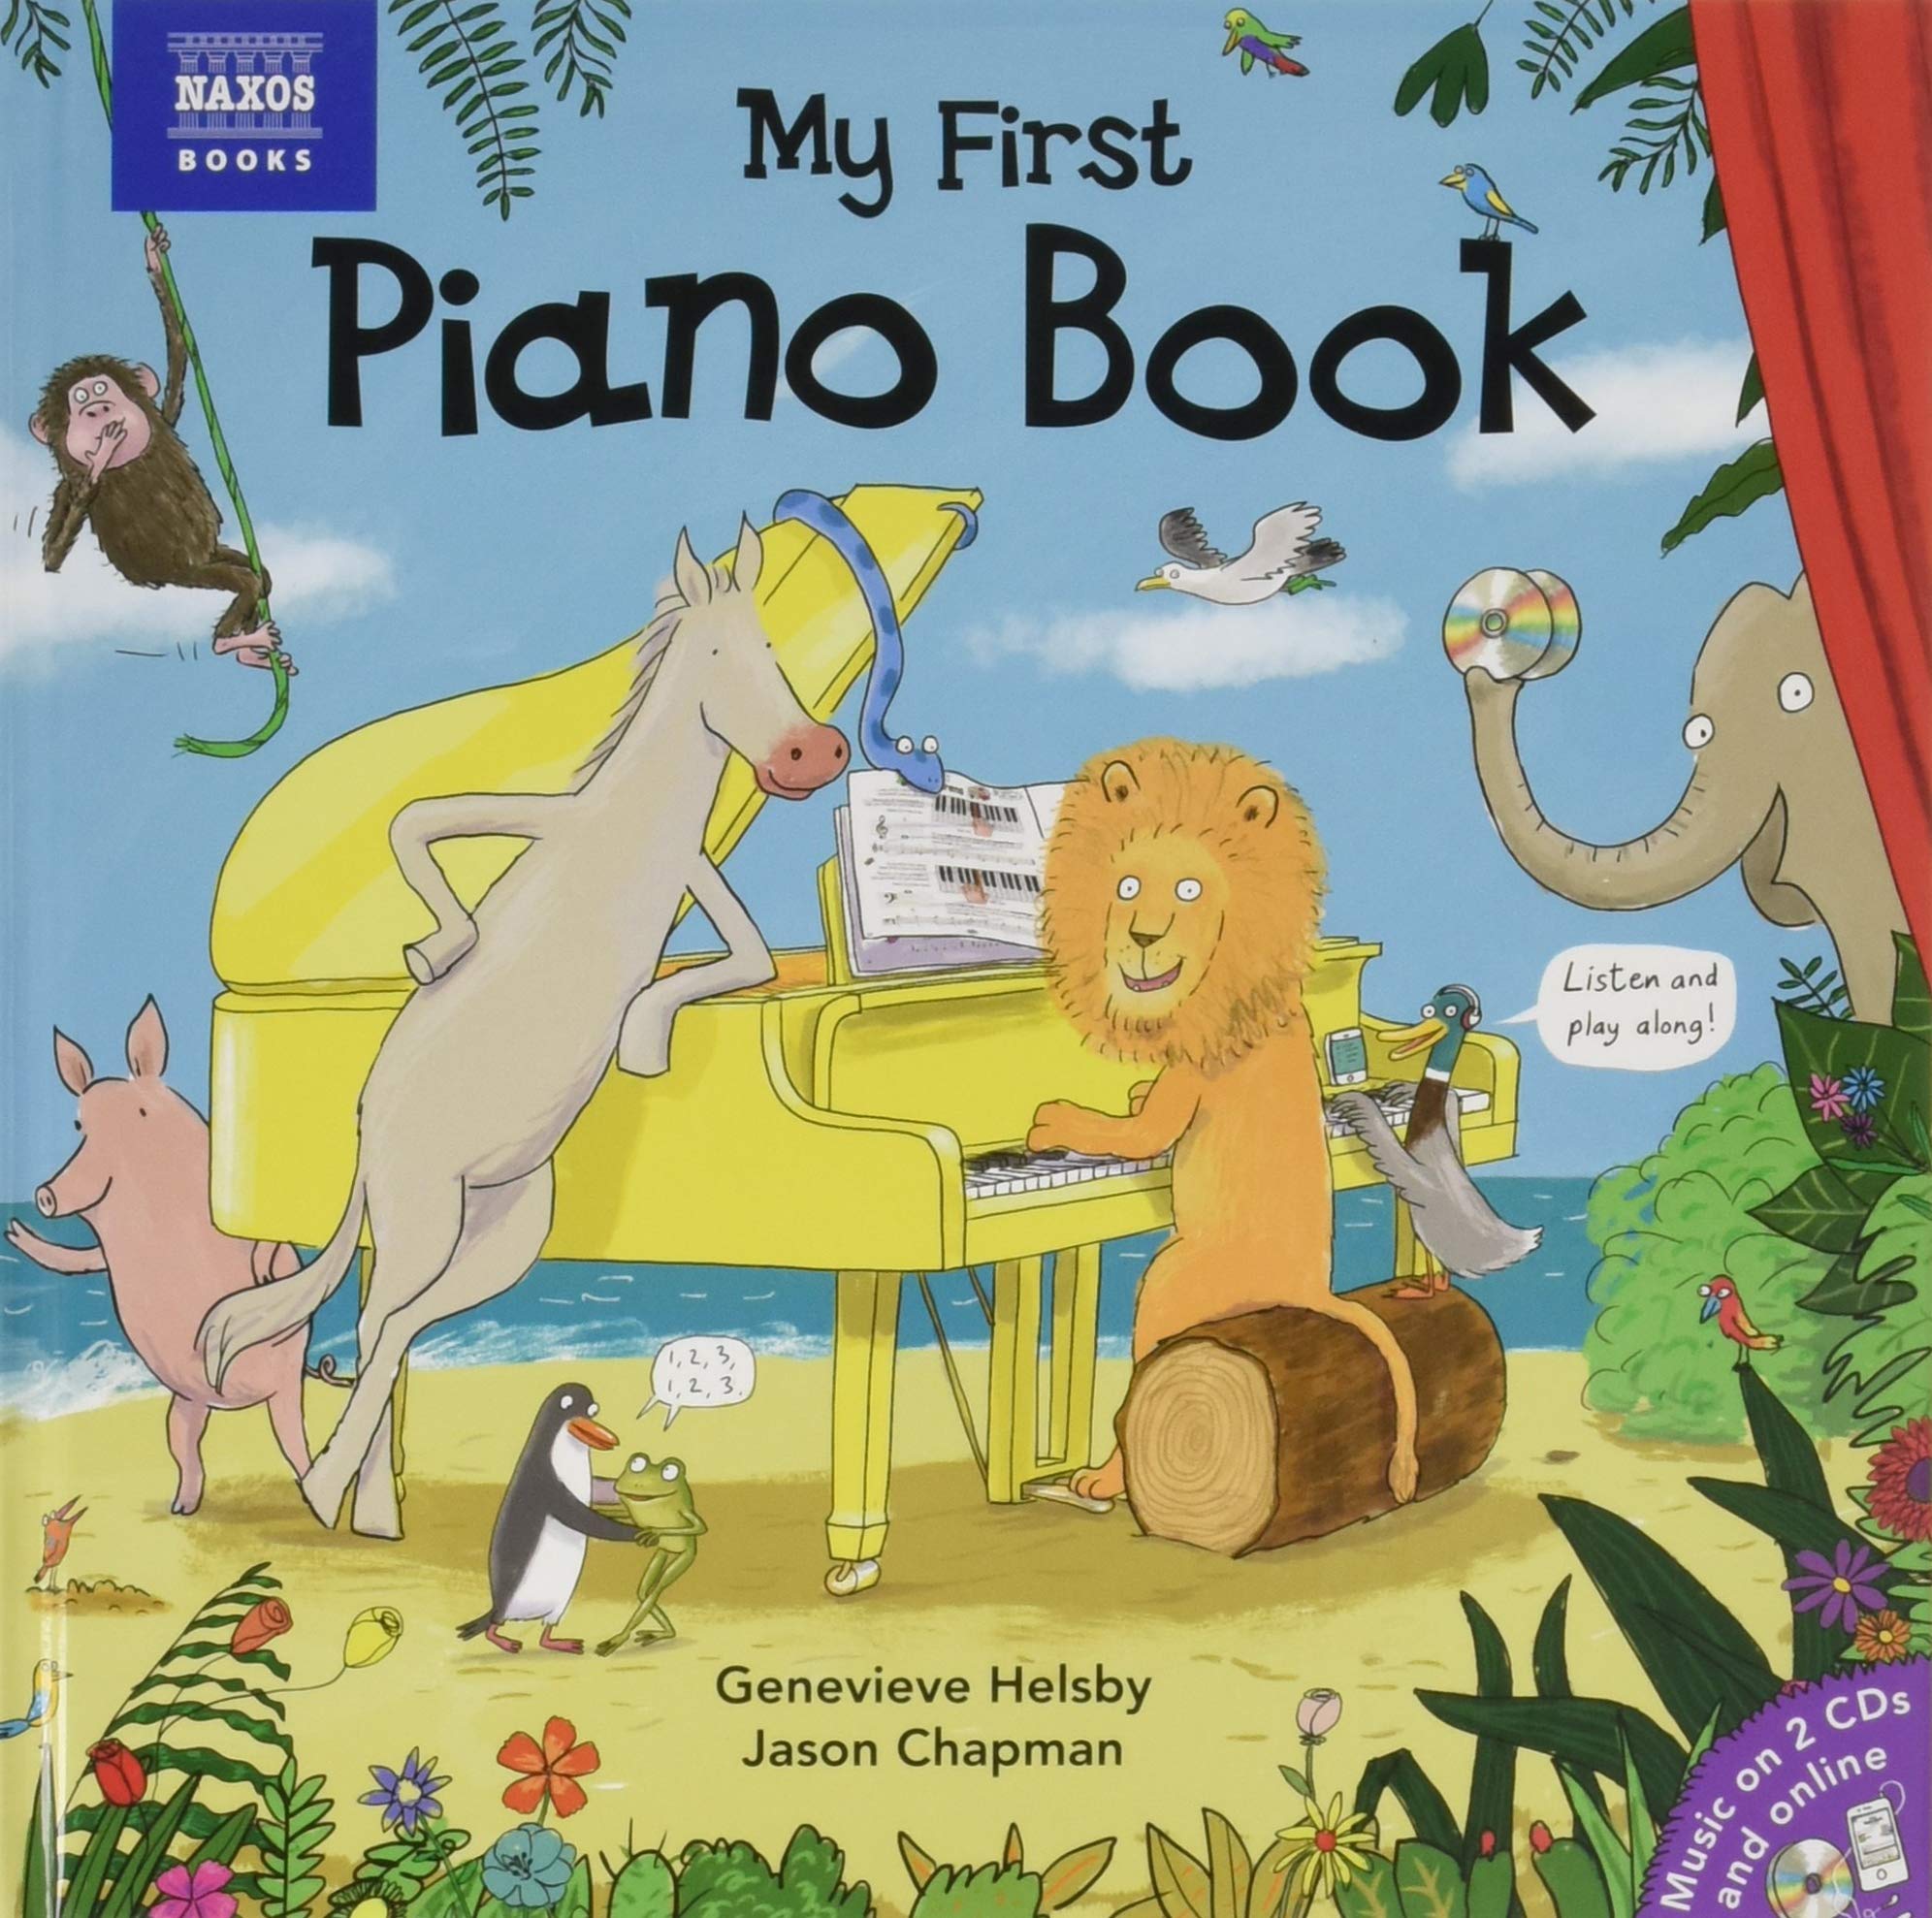 MY FIRST PIANO BOOK